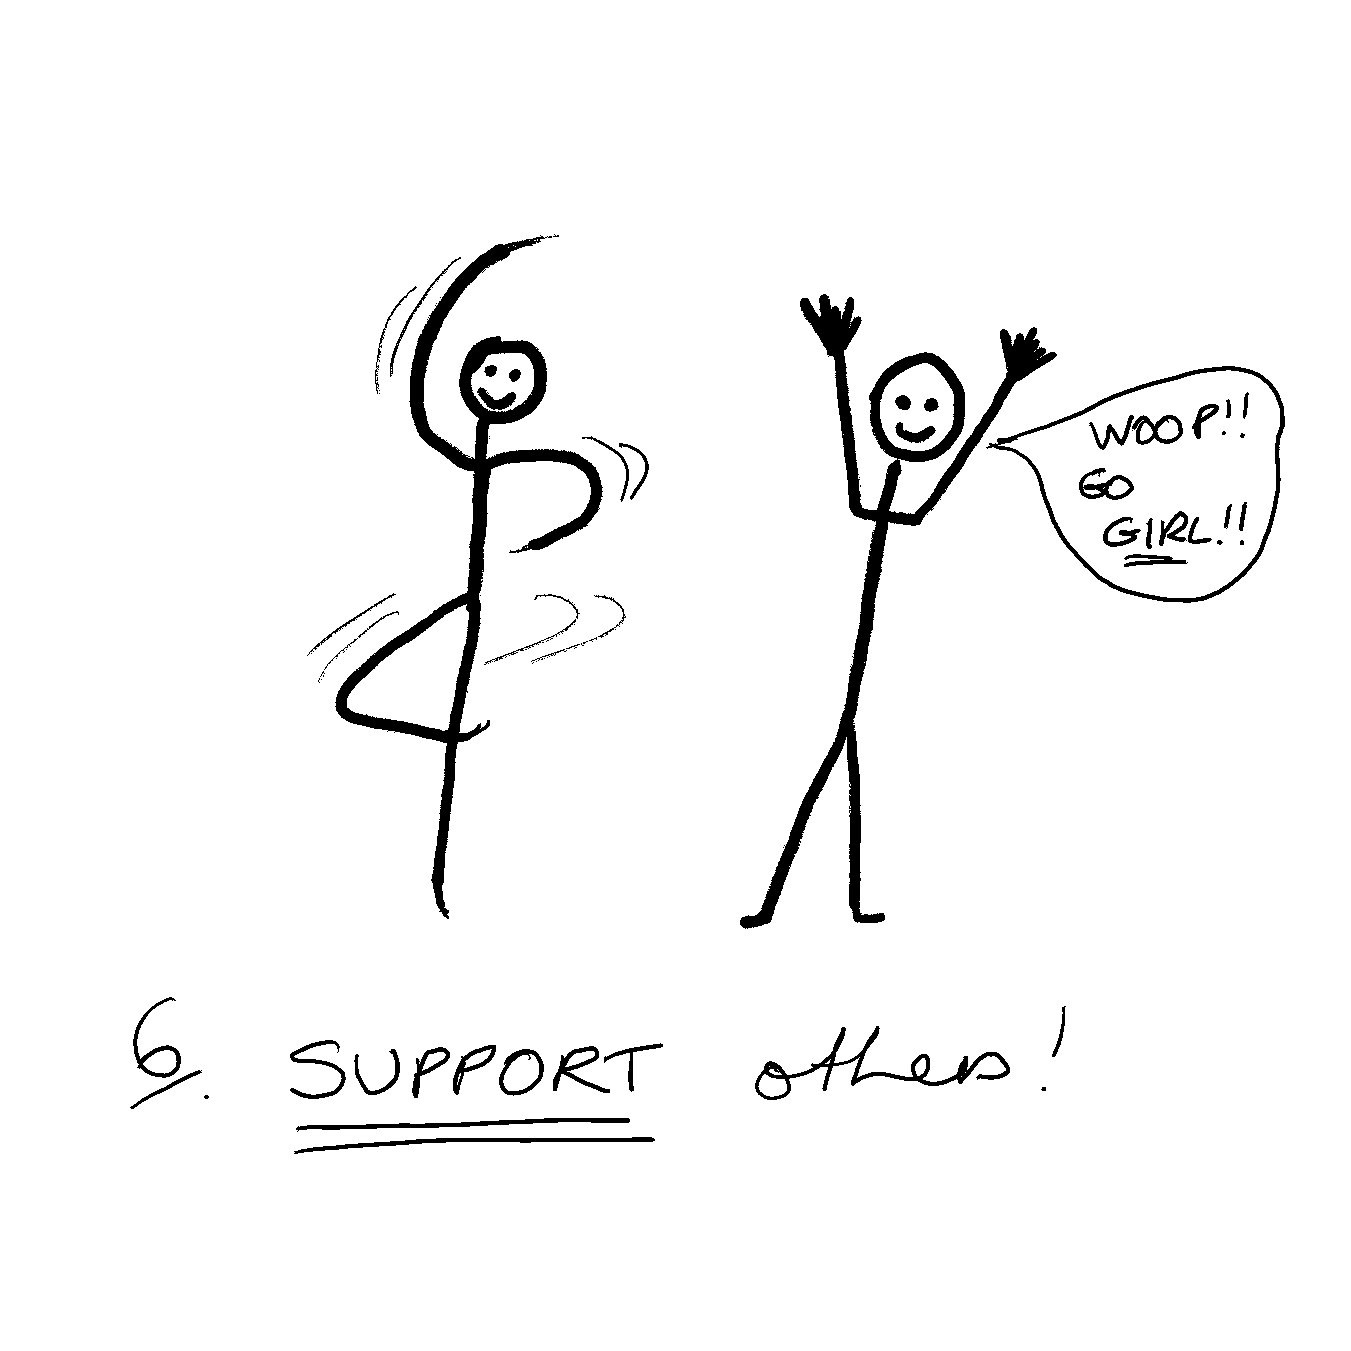 Yoga Class Rule 6: Support Others!